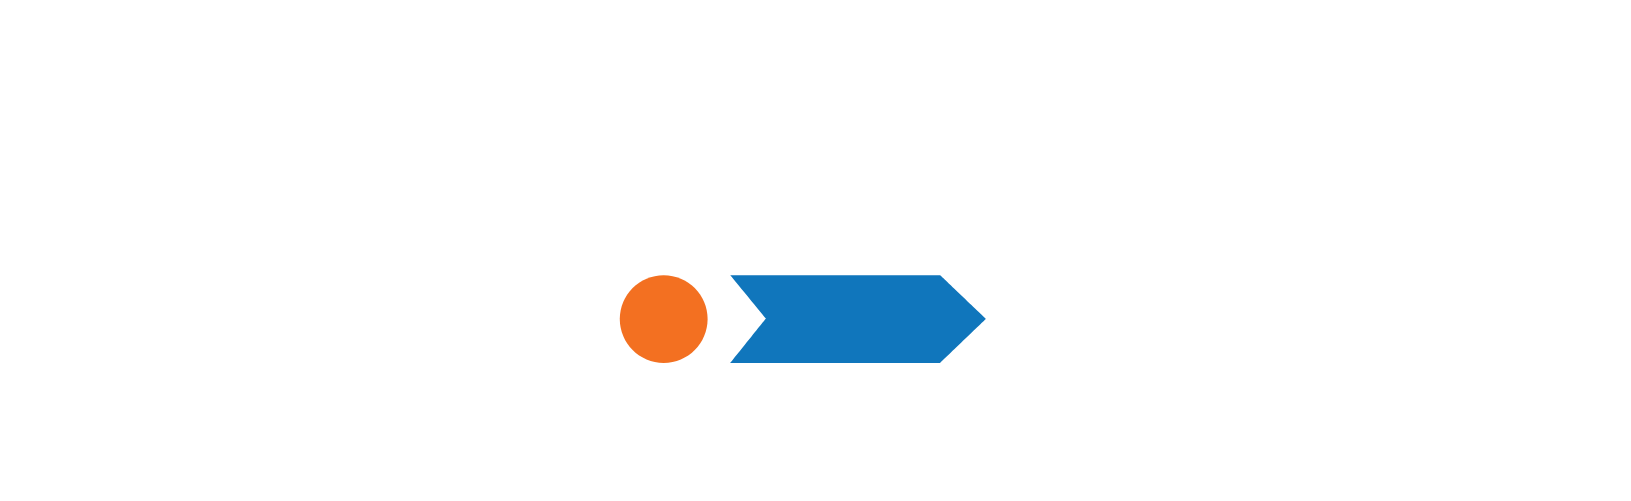 Akero Therapeutics logo large for dark backgrounds (transparent PNG)